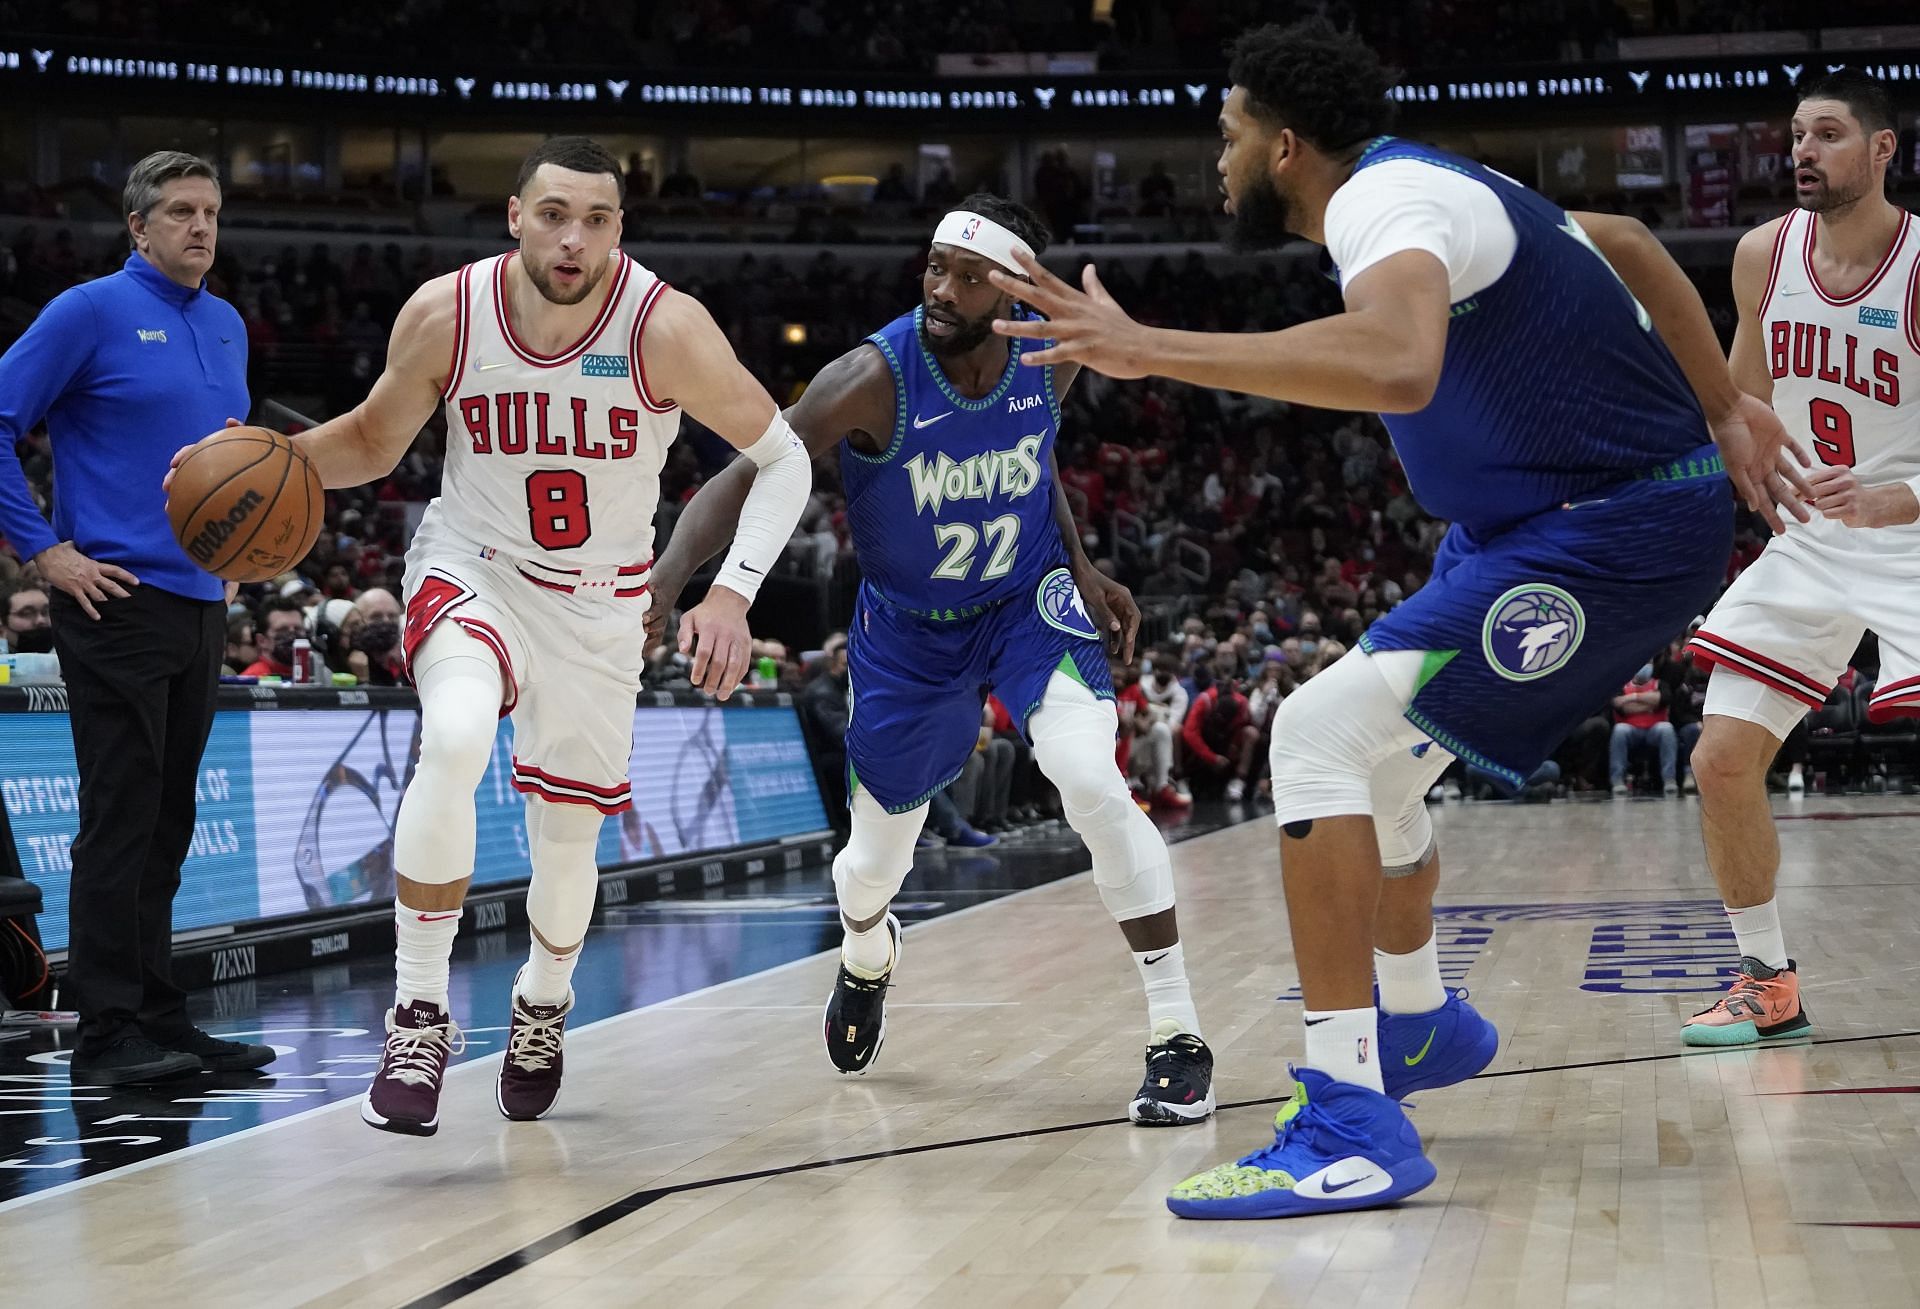 Zach LaVine of the Bulls against Patrick Beverley and Karl-Anthony Towns of the Timberwolves